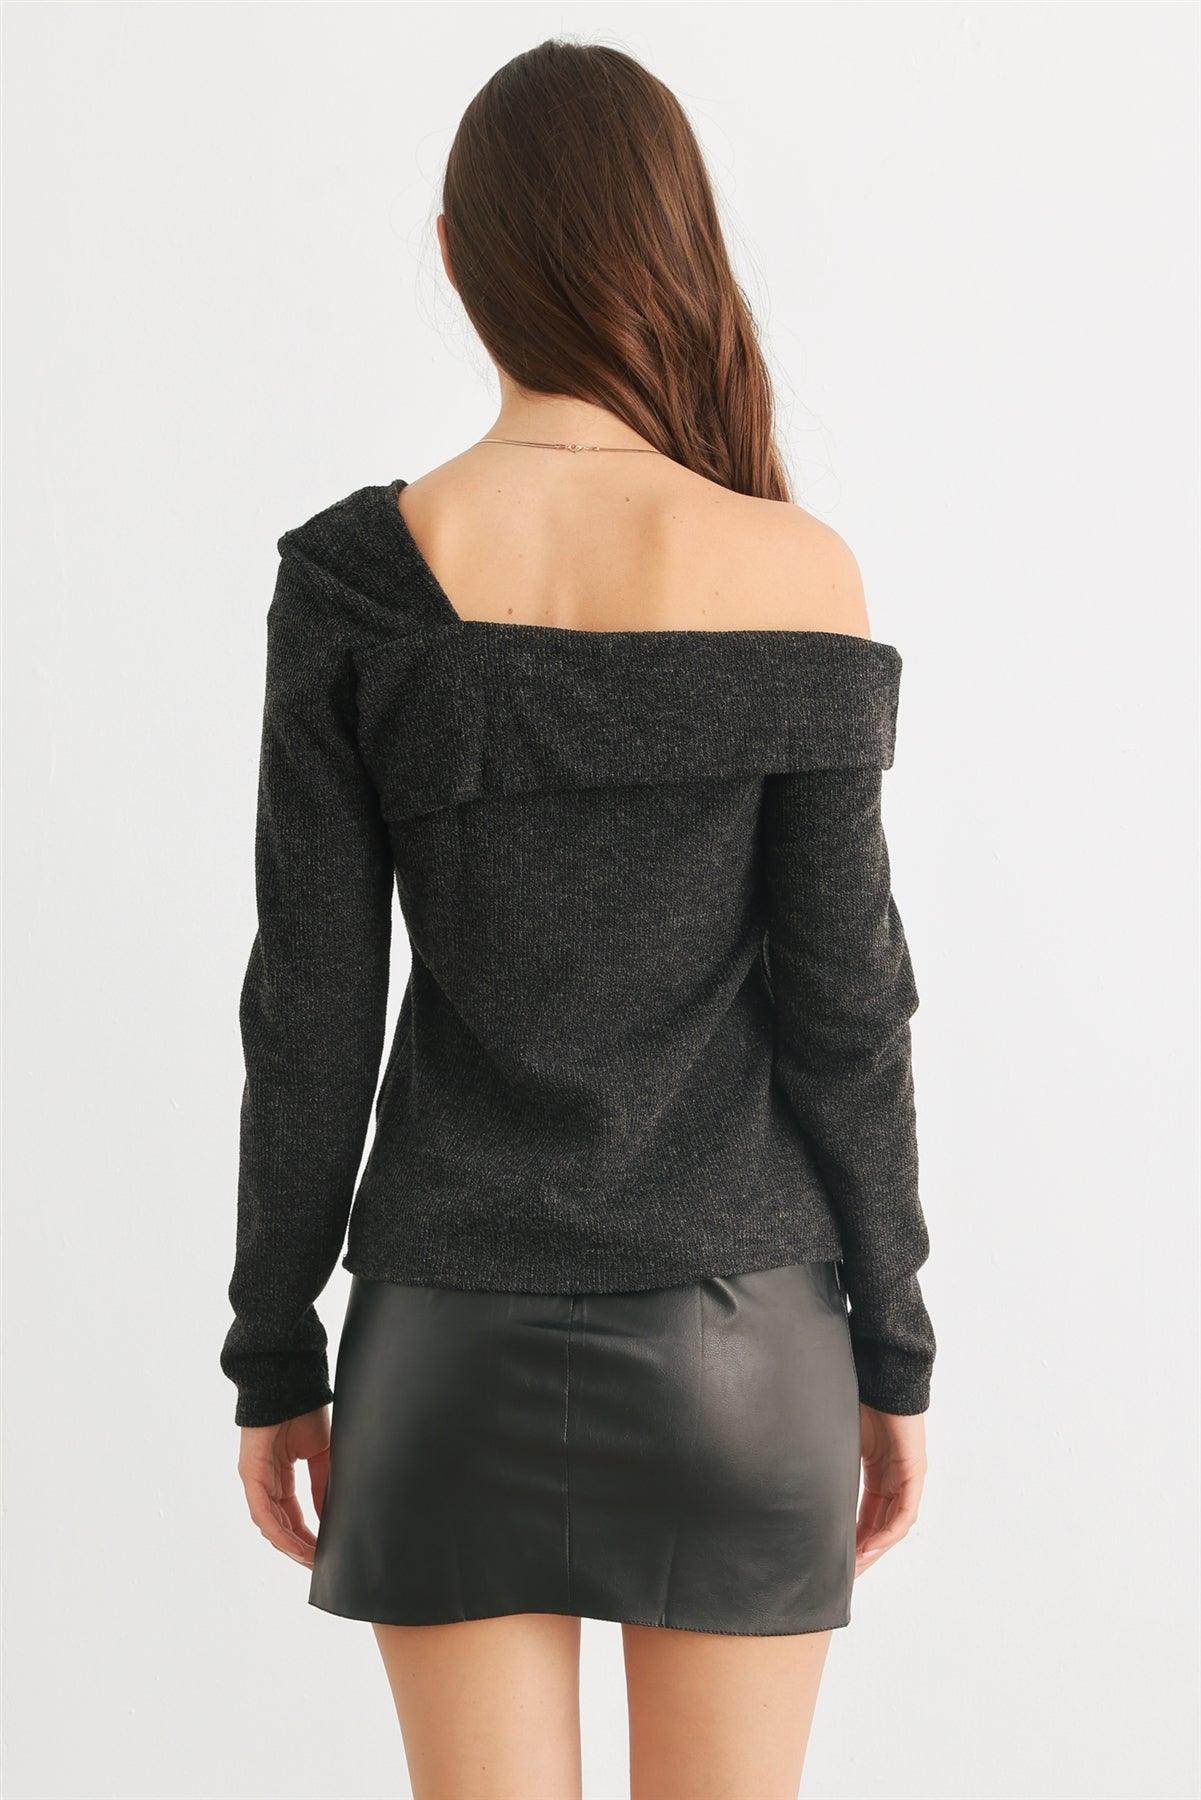 Charcoal Knit One Shoulder Long Sleeve Top /2-2-2